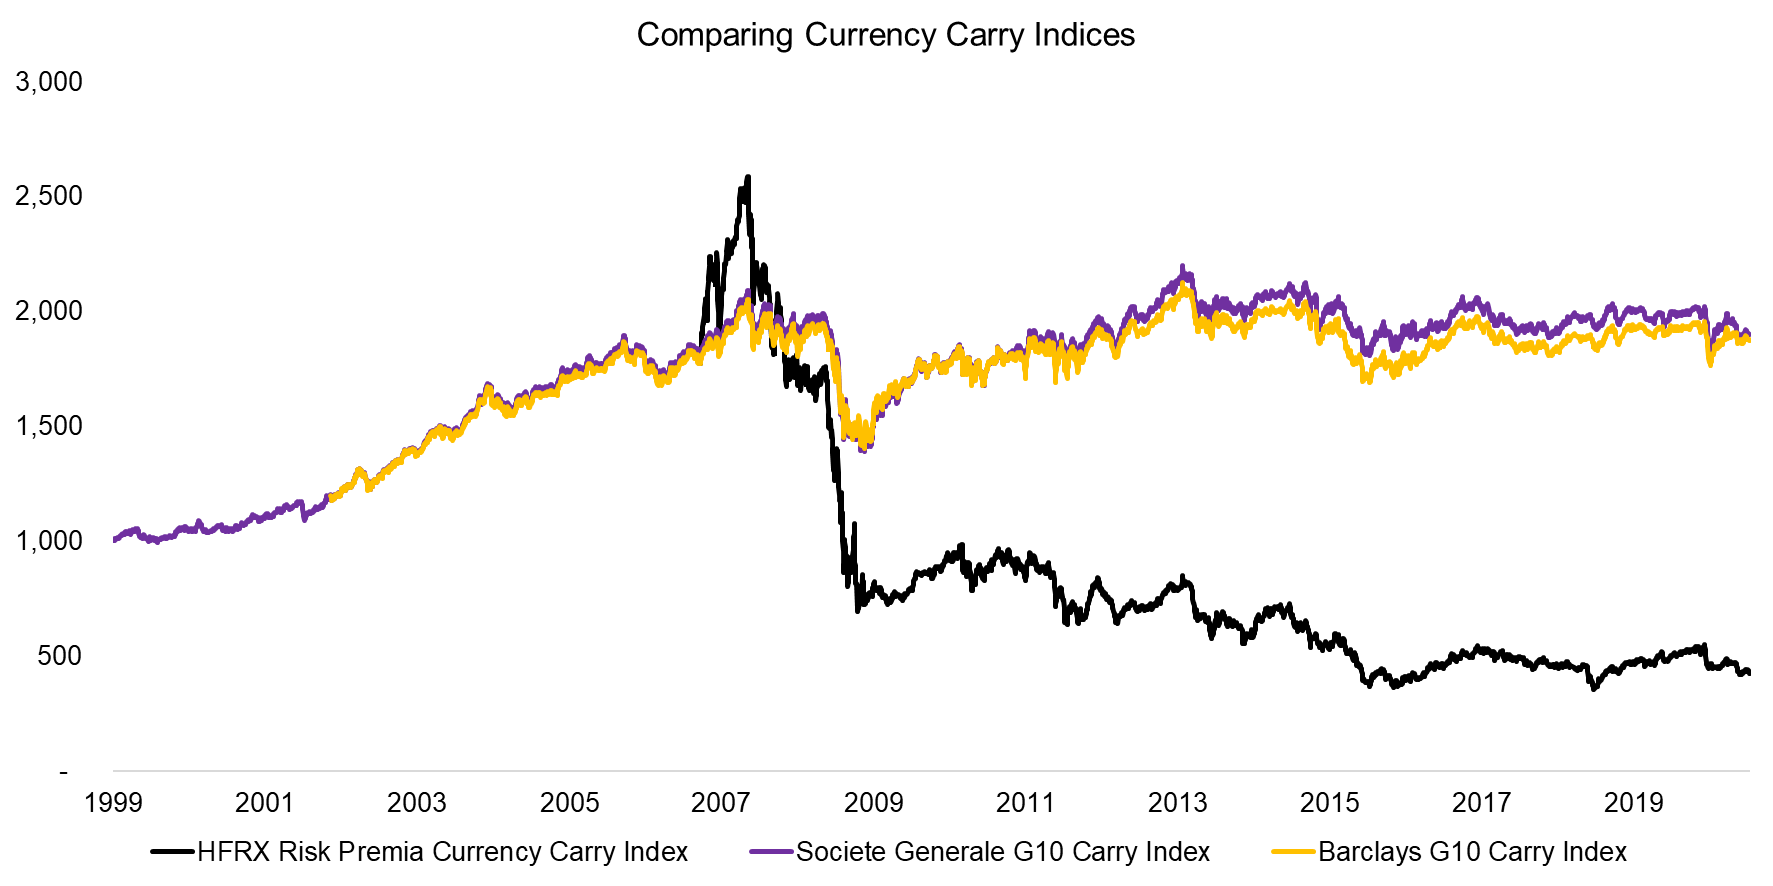 Comparing Currency Carry Indices